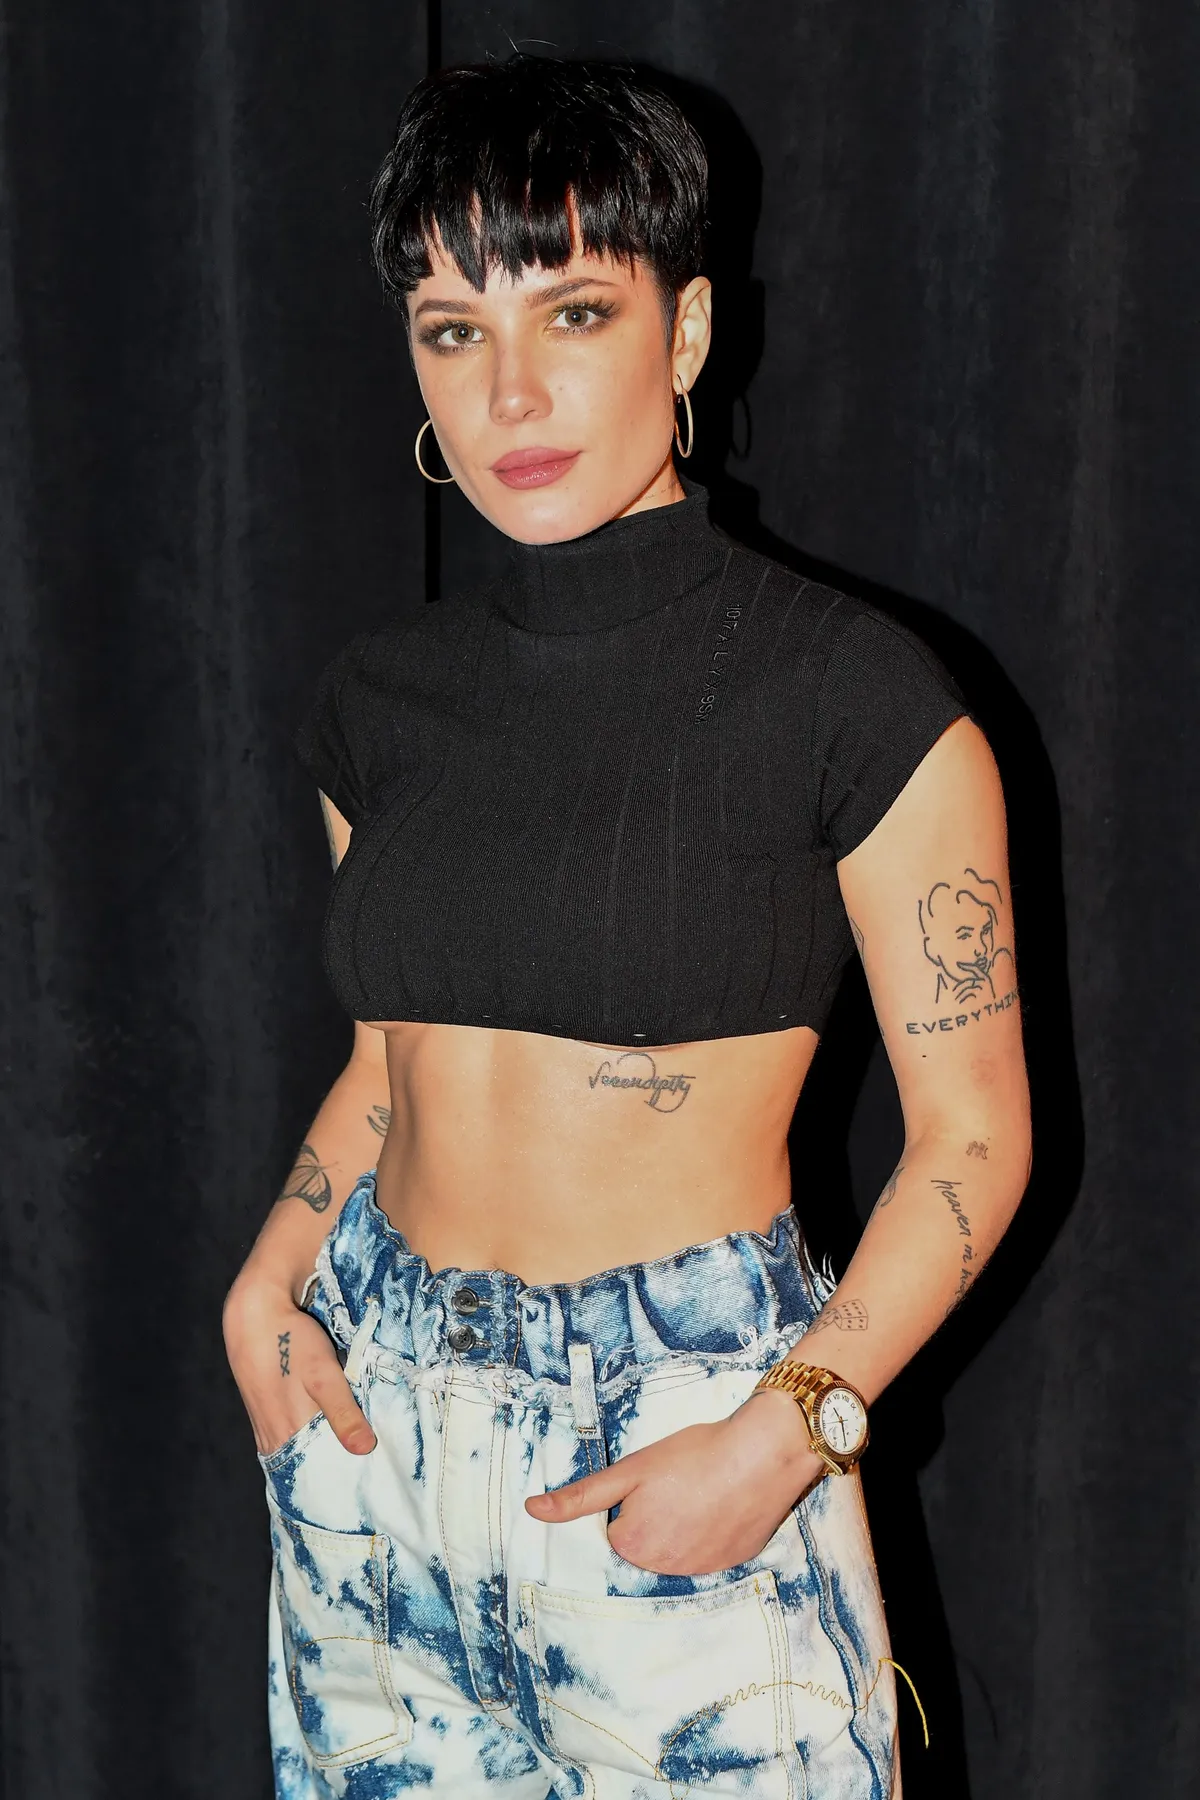 Halsey at the basketball match between the Los Angeles Lakers and Cleveland Cavaliers on January 13, 2020, in Los Angeles, California. | Photo: Getty Images